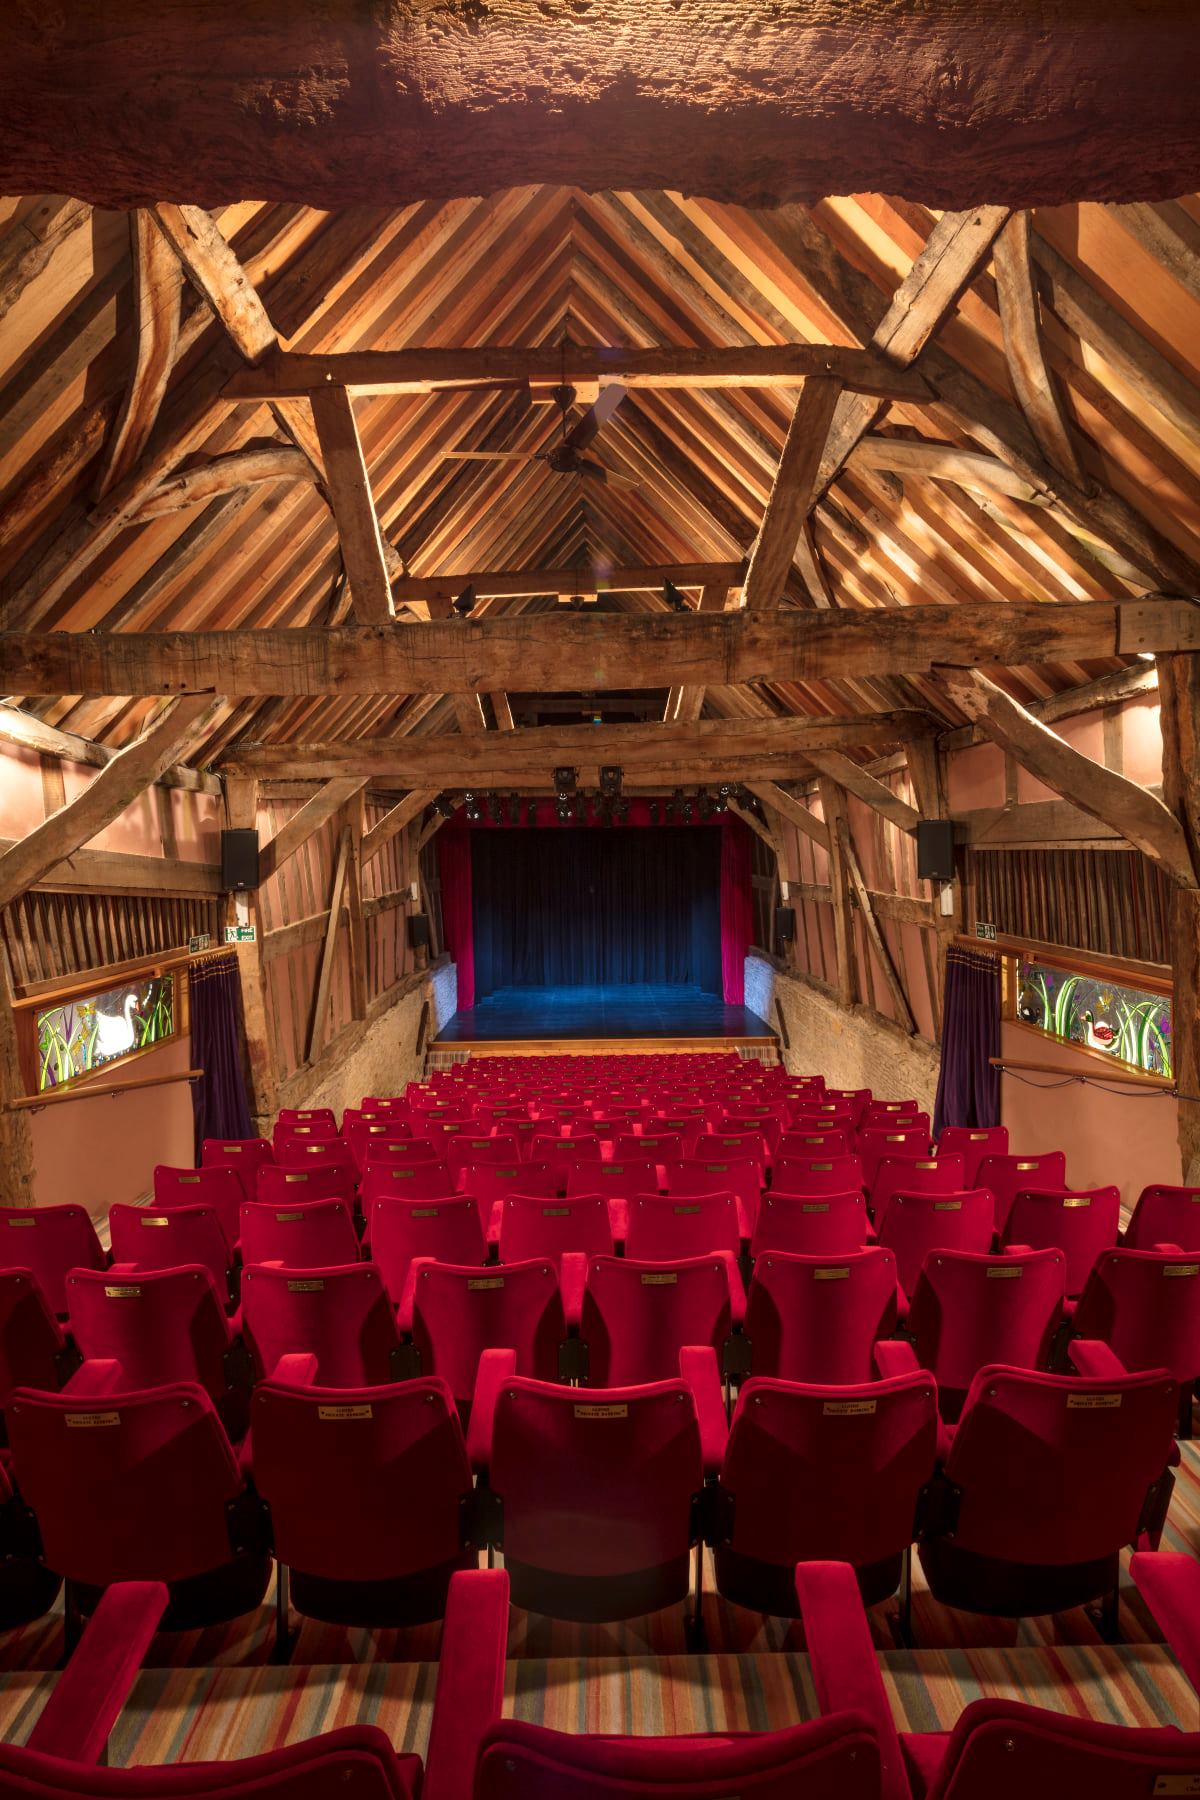 A photo of theatre seats looking towards the stage inside the medieval barn of Bretforton Theatrebarn